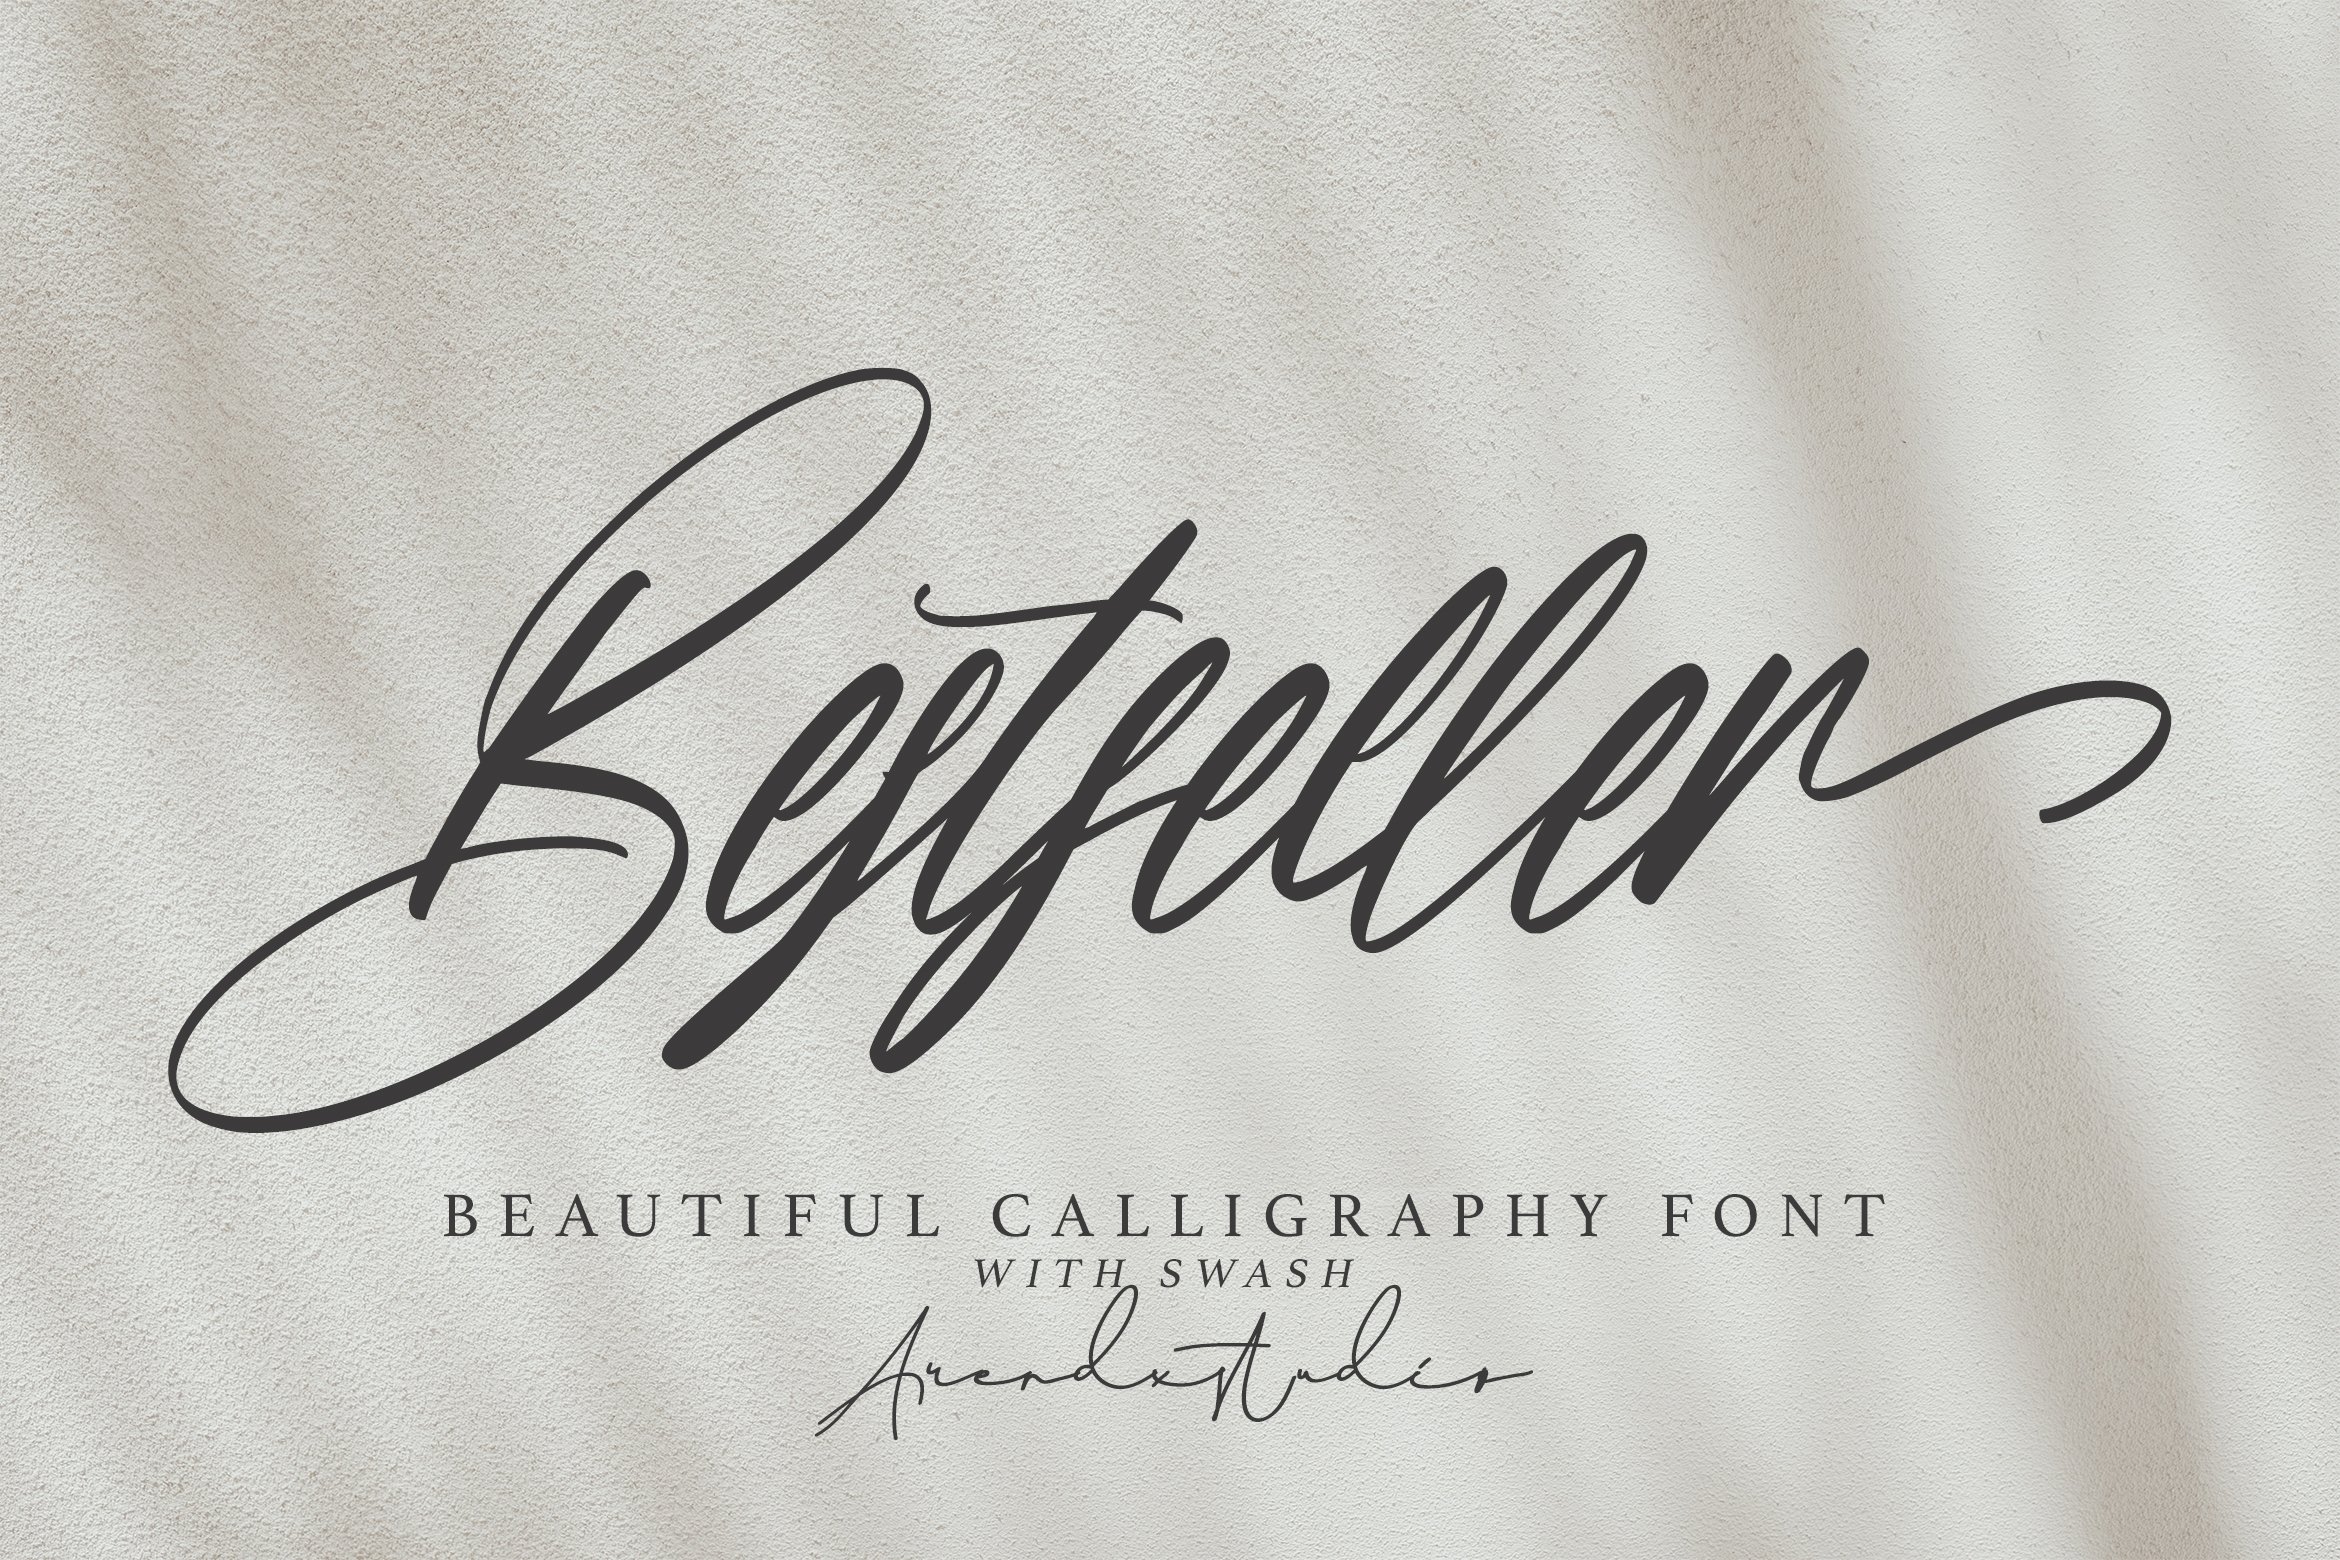 Bestseller - Beautiful Calligraphy cover image.